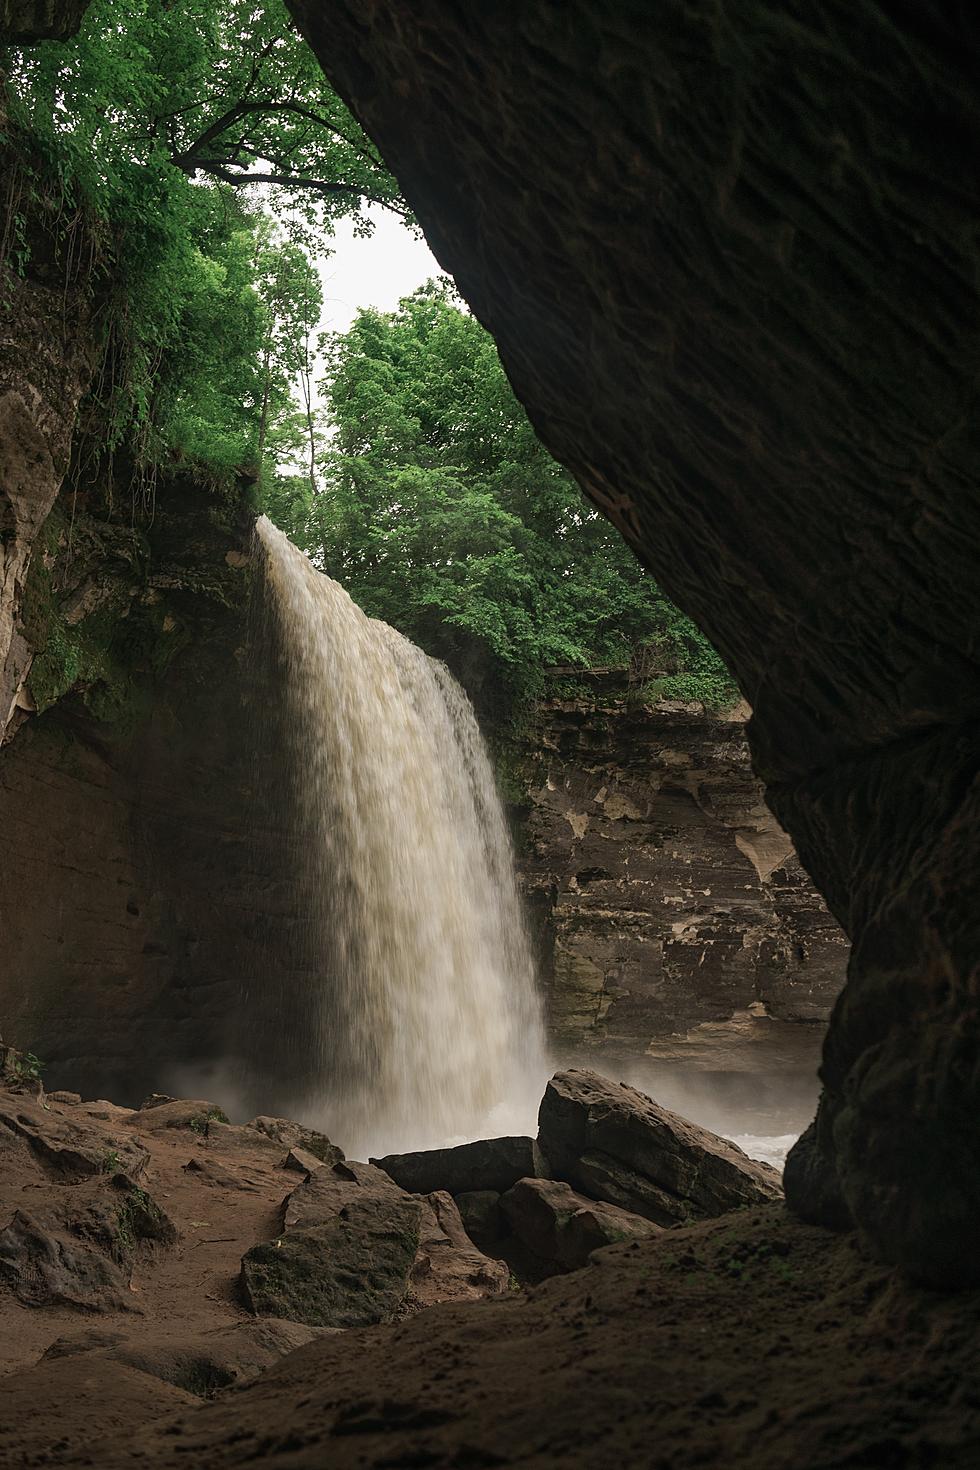 Visit This Beautiful Waterfall 45 Miles from Owatonna For FREE This Black Friday